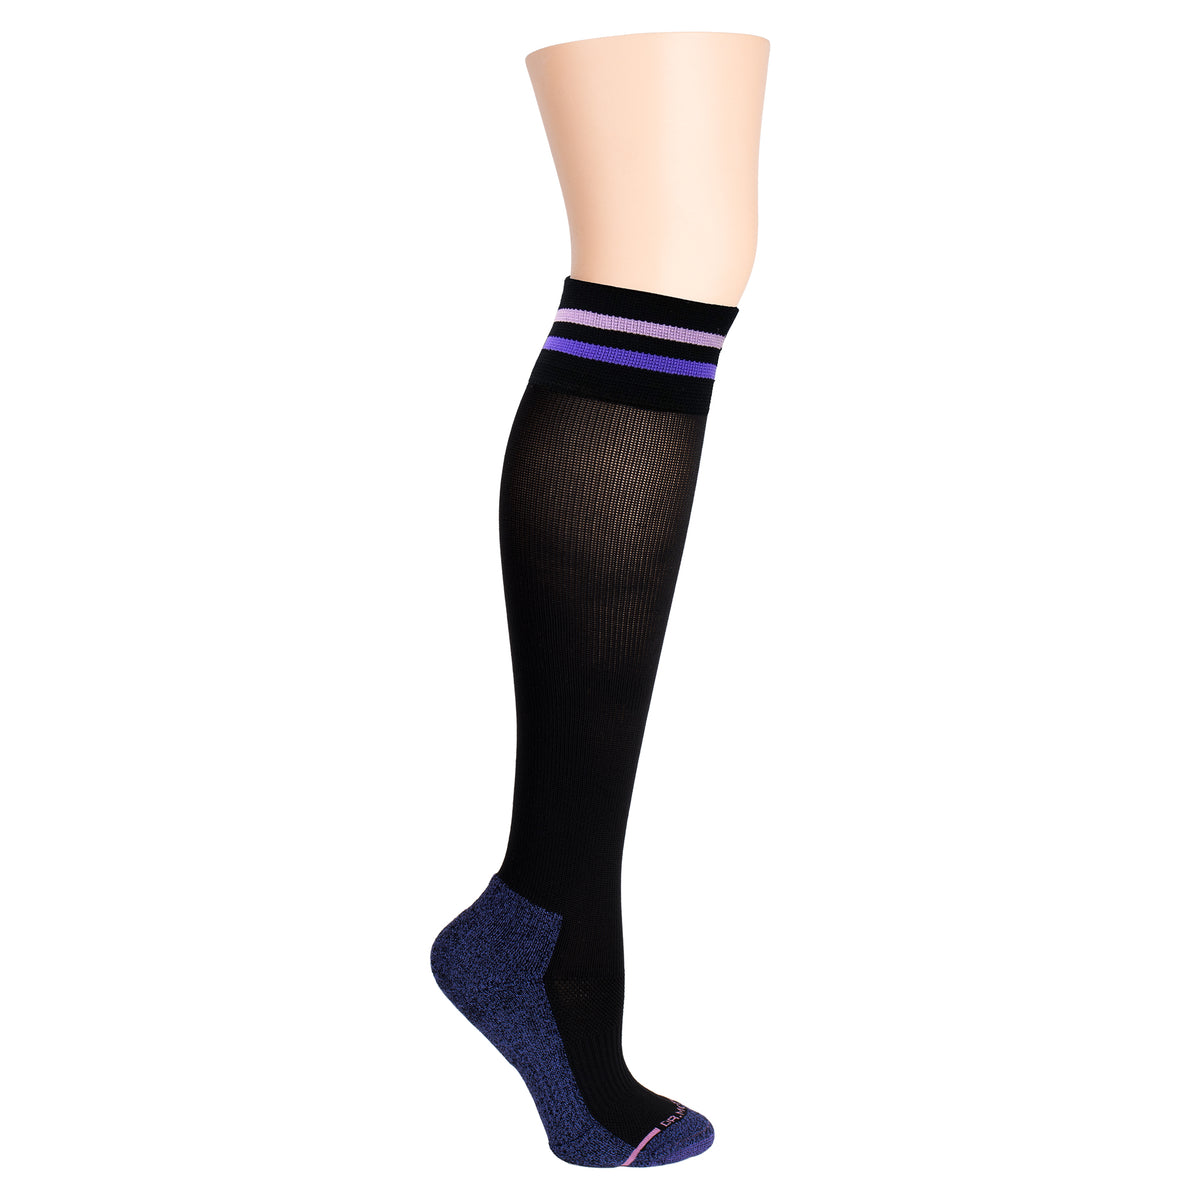 Women's Microflat Compression Knee High